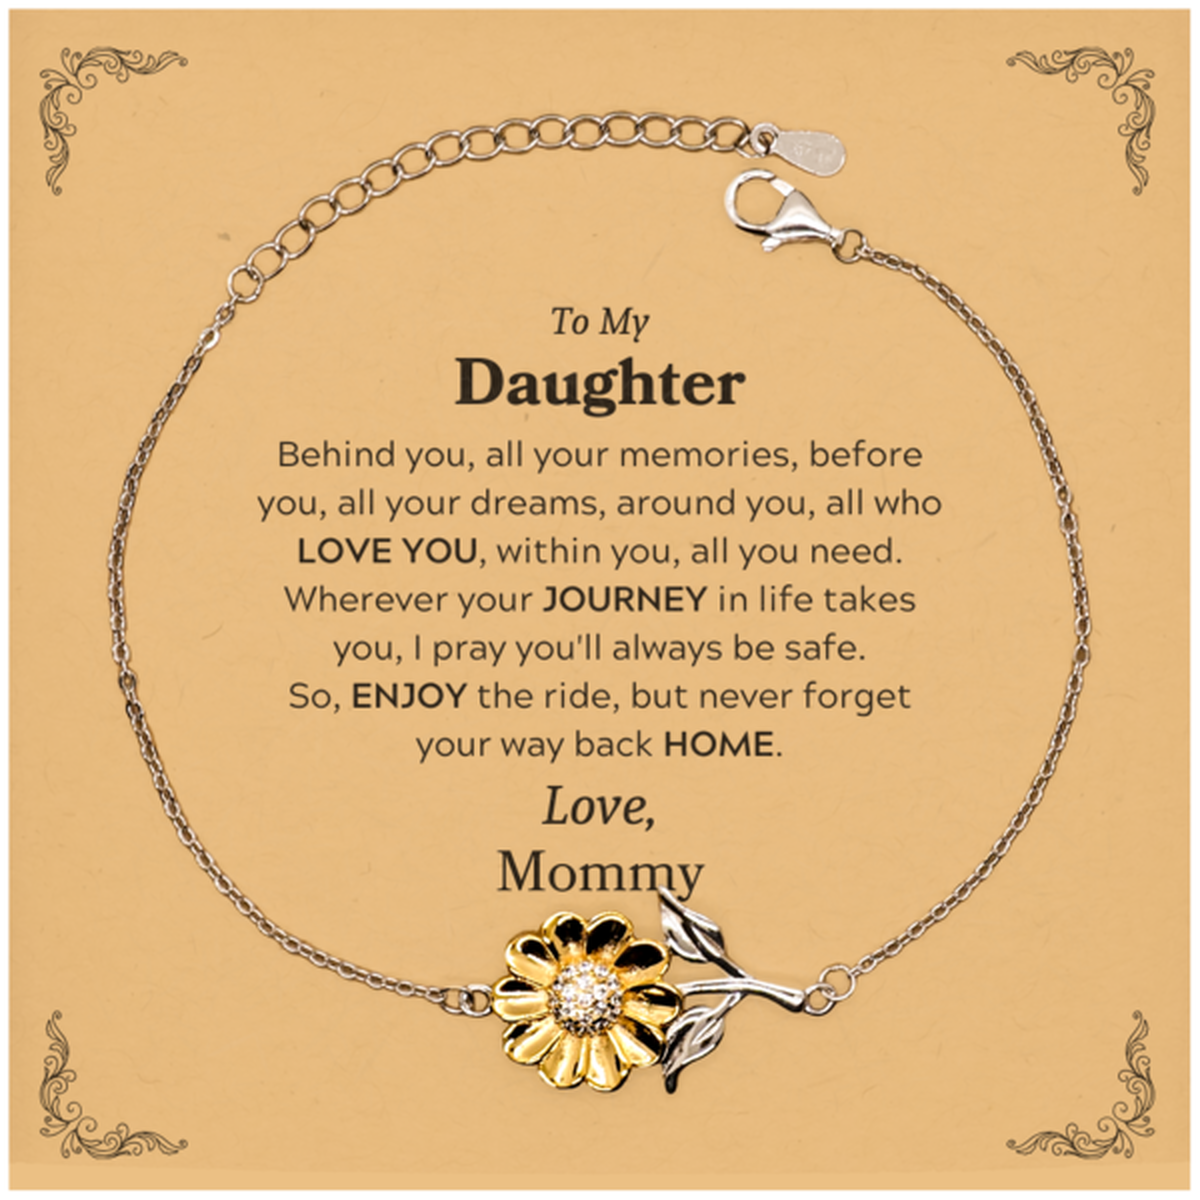 To My Daughter Graduation Gifts from Mommy, Daughter Sunflower Bracelet Christmas Birthday Gifts for Daughter Behind you, all your memories, before you, all your dreams. Love, Mommy